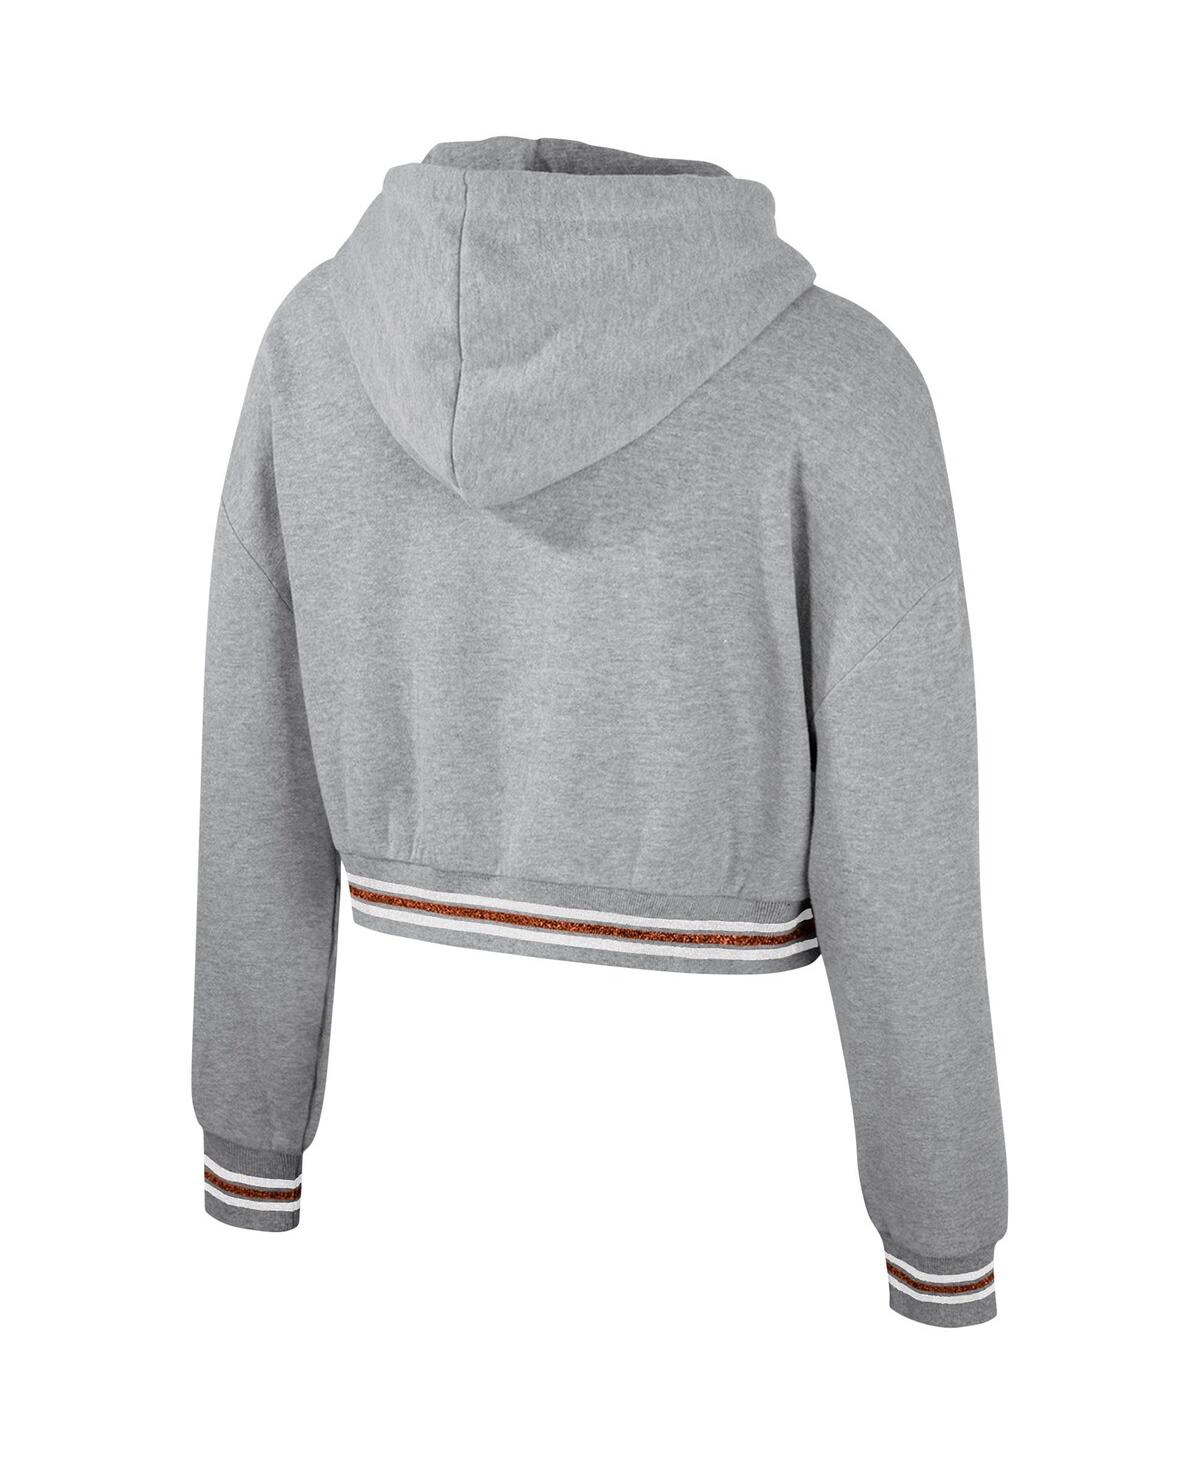 Shop The Wild Collective Women's  Heather Gray Distressed Texas Longhorns Cropped Shimmer Pullover Hoodie